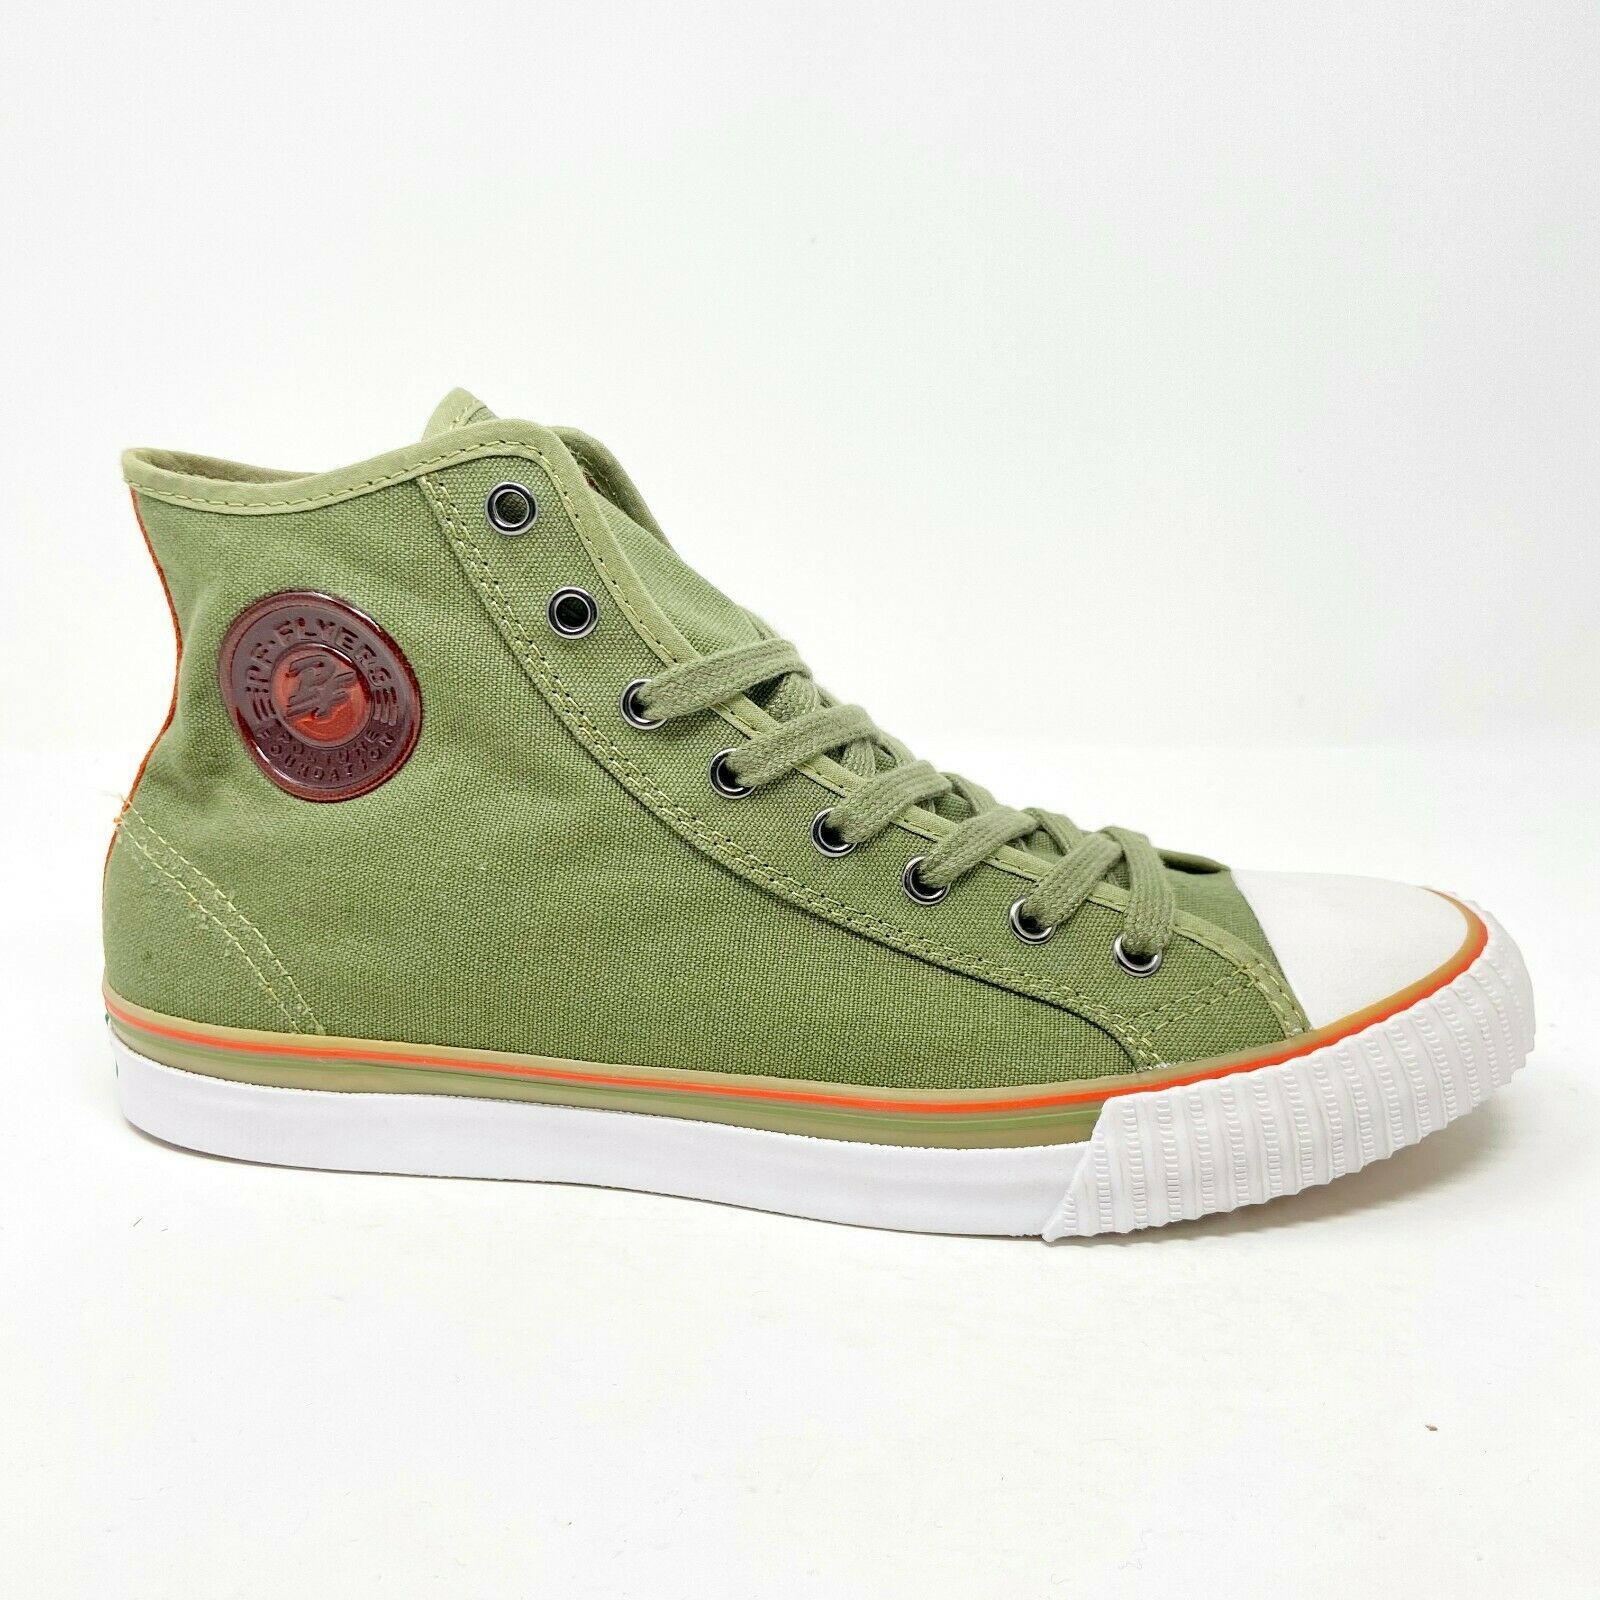 PF Flyers Center Hi Reiss Army Olive Green White Men Sneakers PM11CH2B